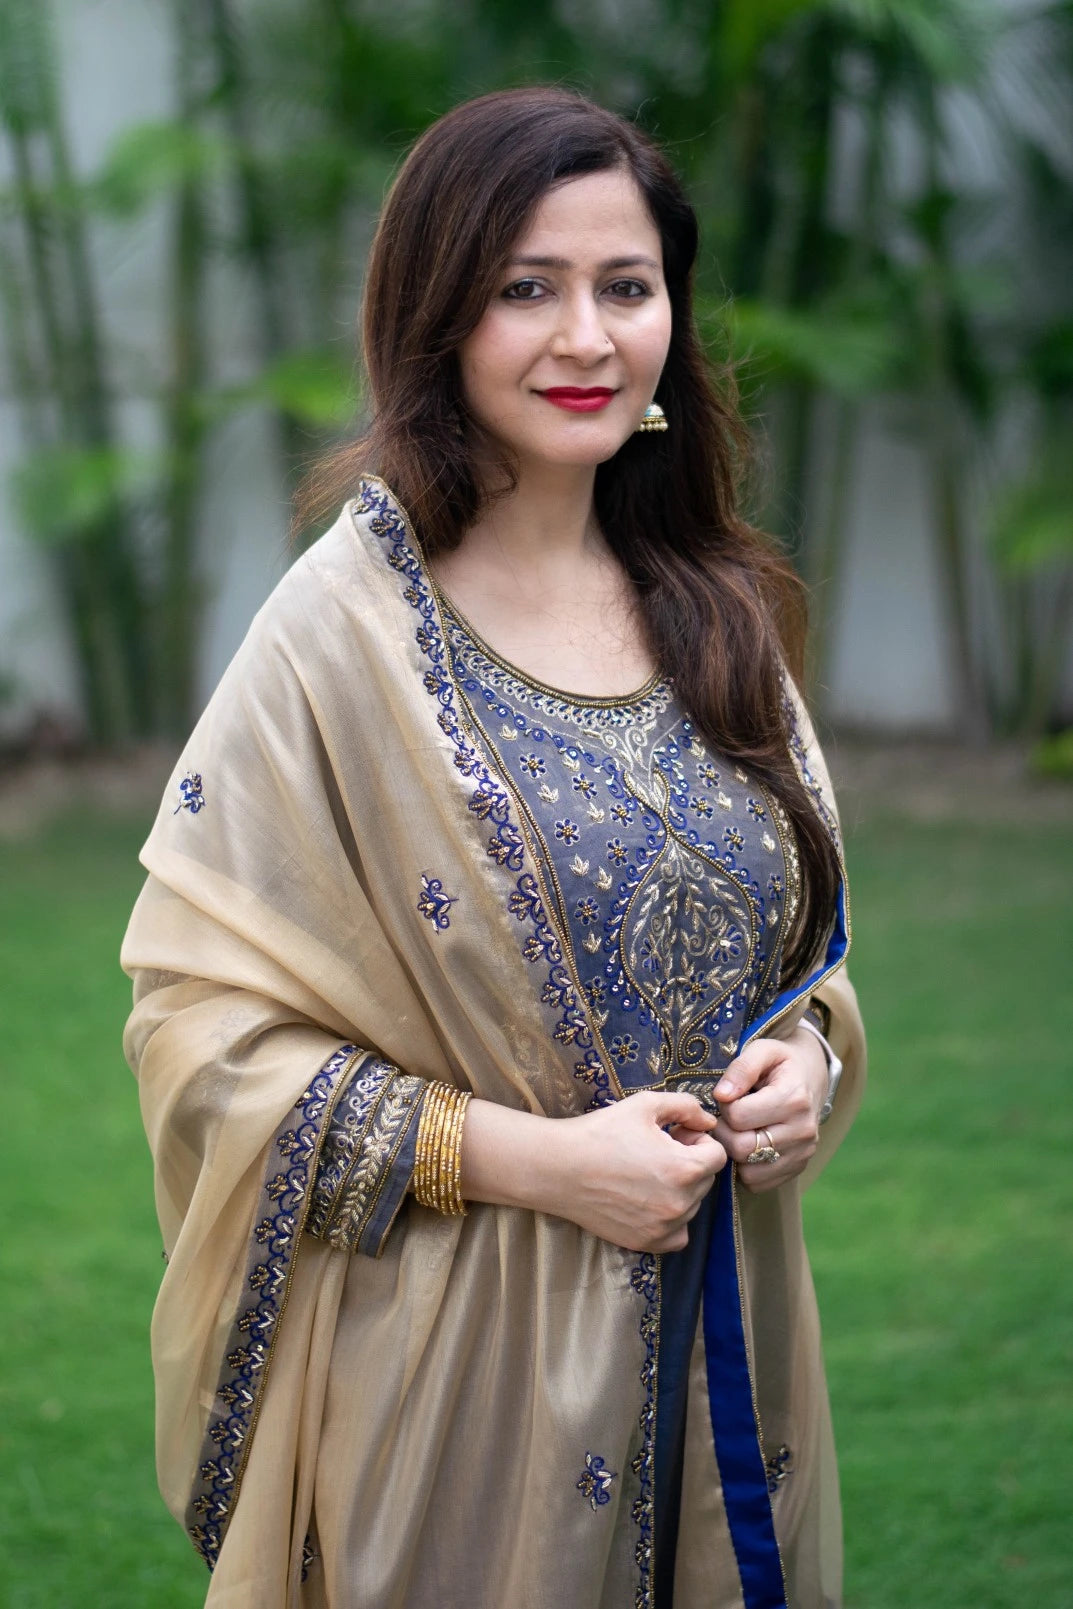 A woman wearing a blue kurta with intricate zardozi work and golden palazzo pants, holding a matching golden tissue dupatta draped over her arm.